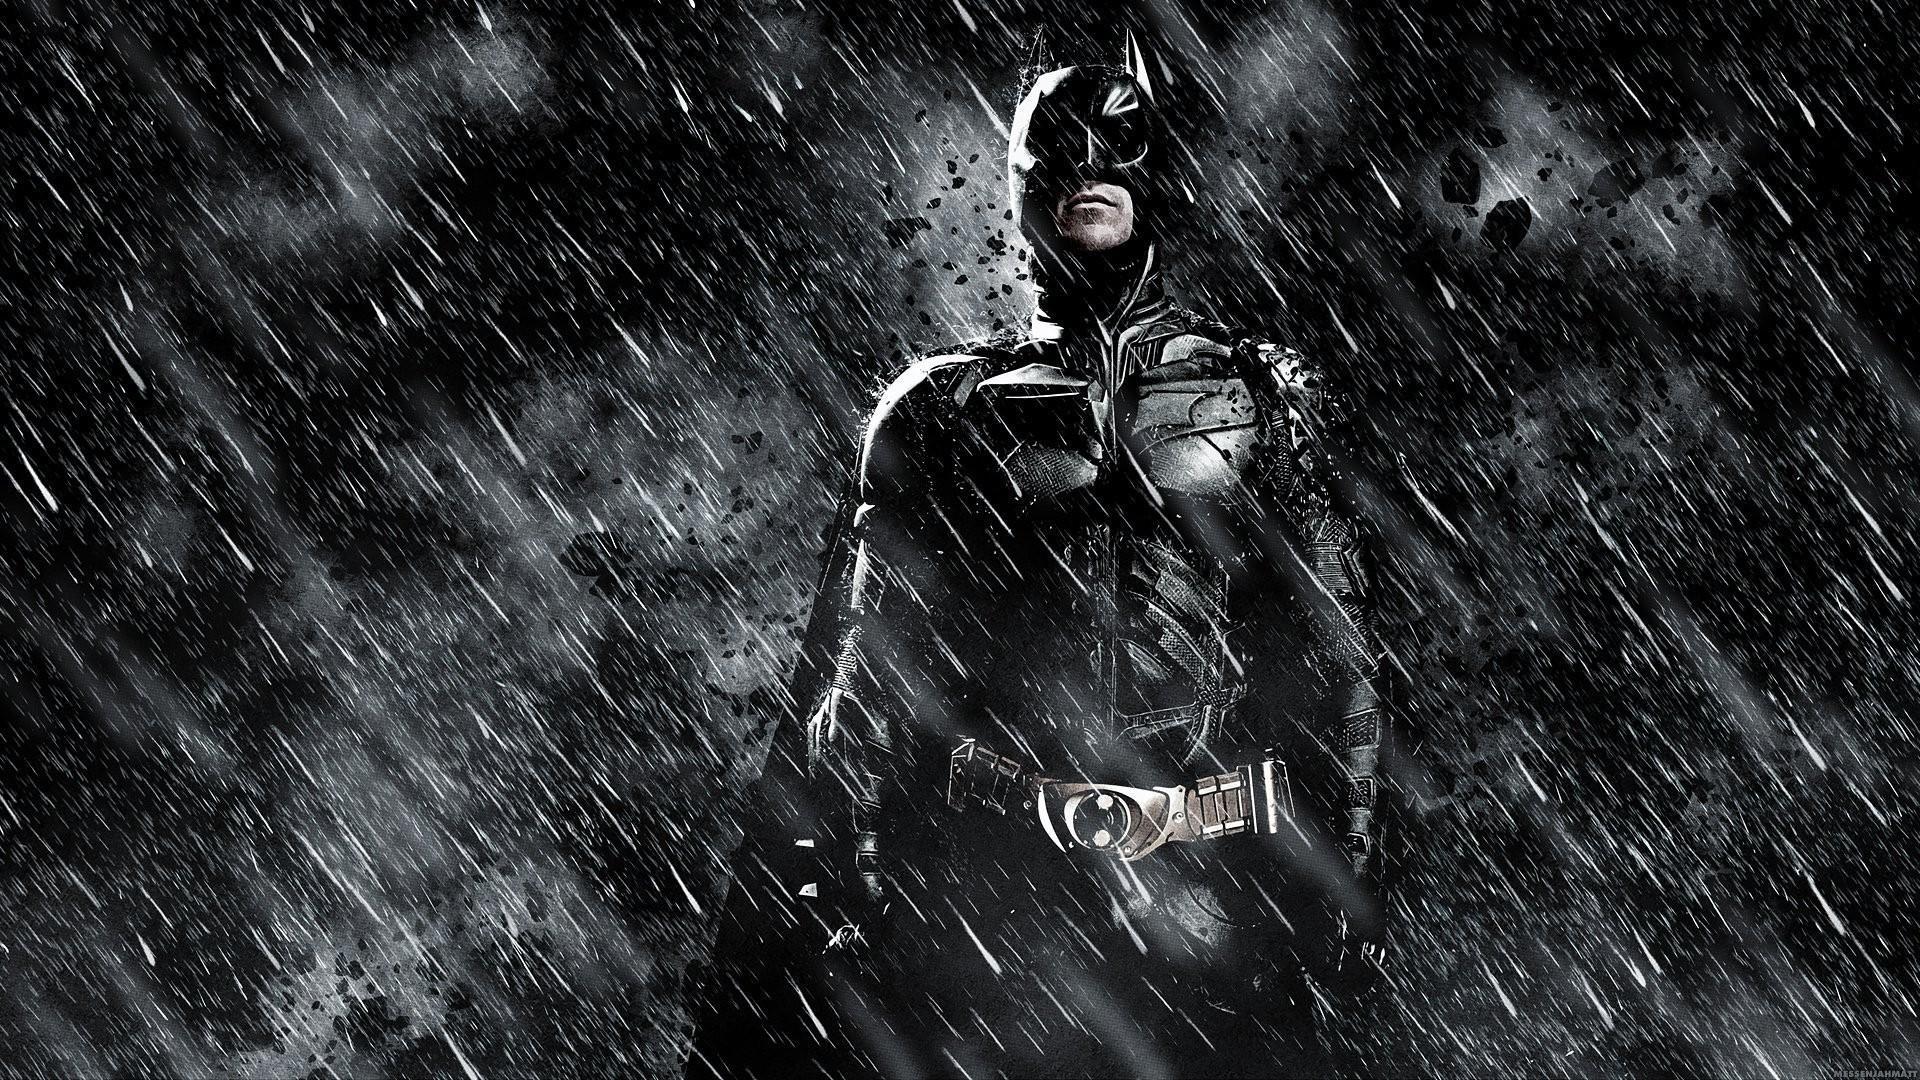 The Dark Knight Wallpapers 1920x1080 - Wallpaper Cave